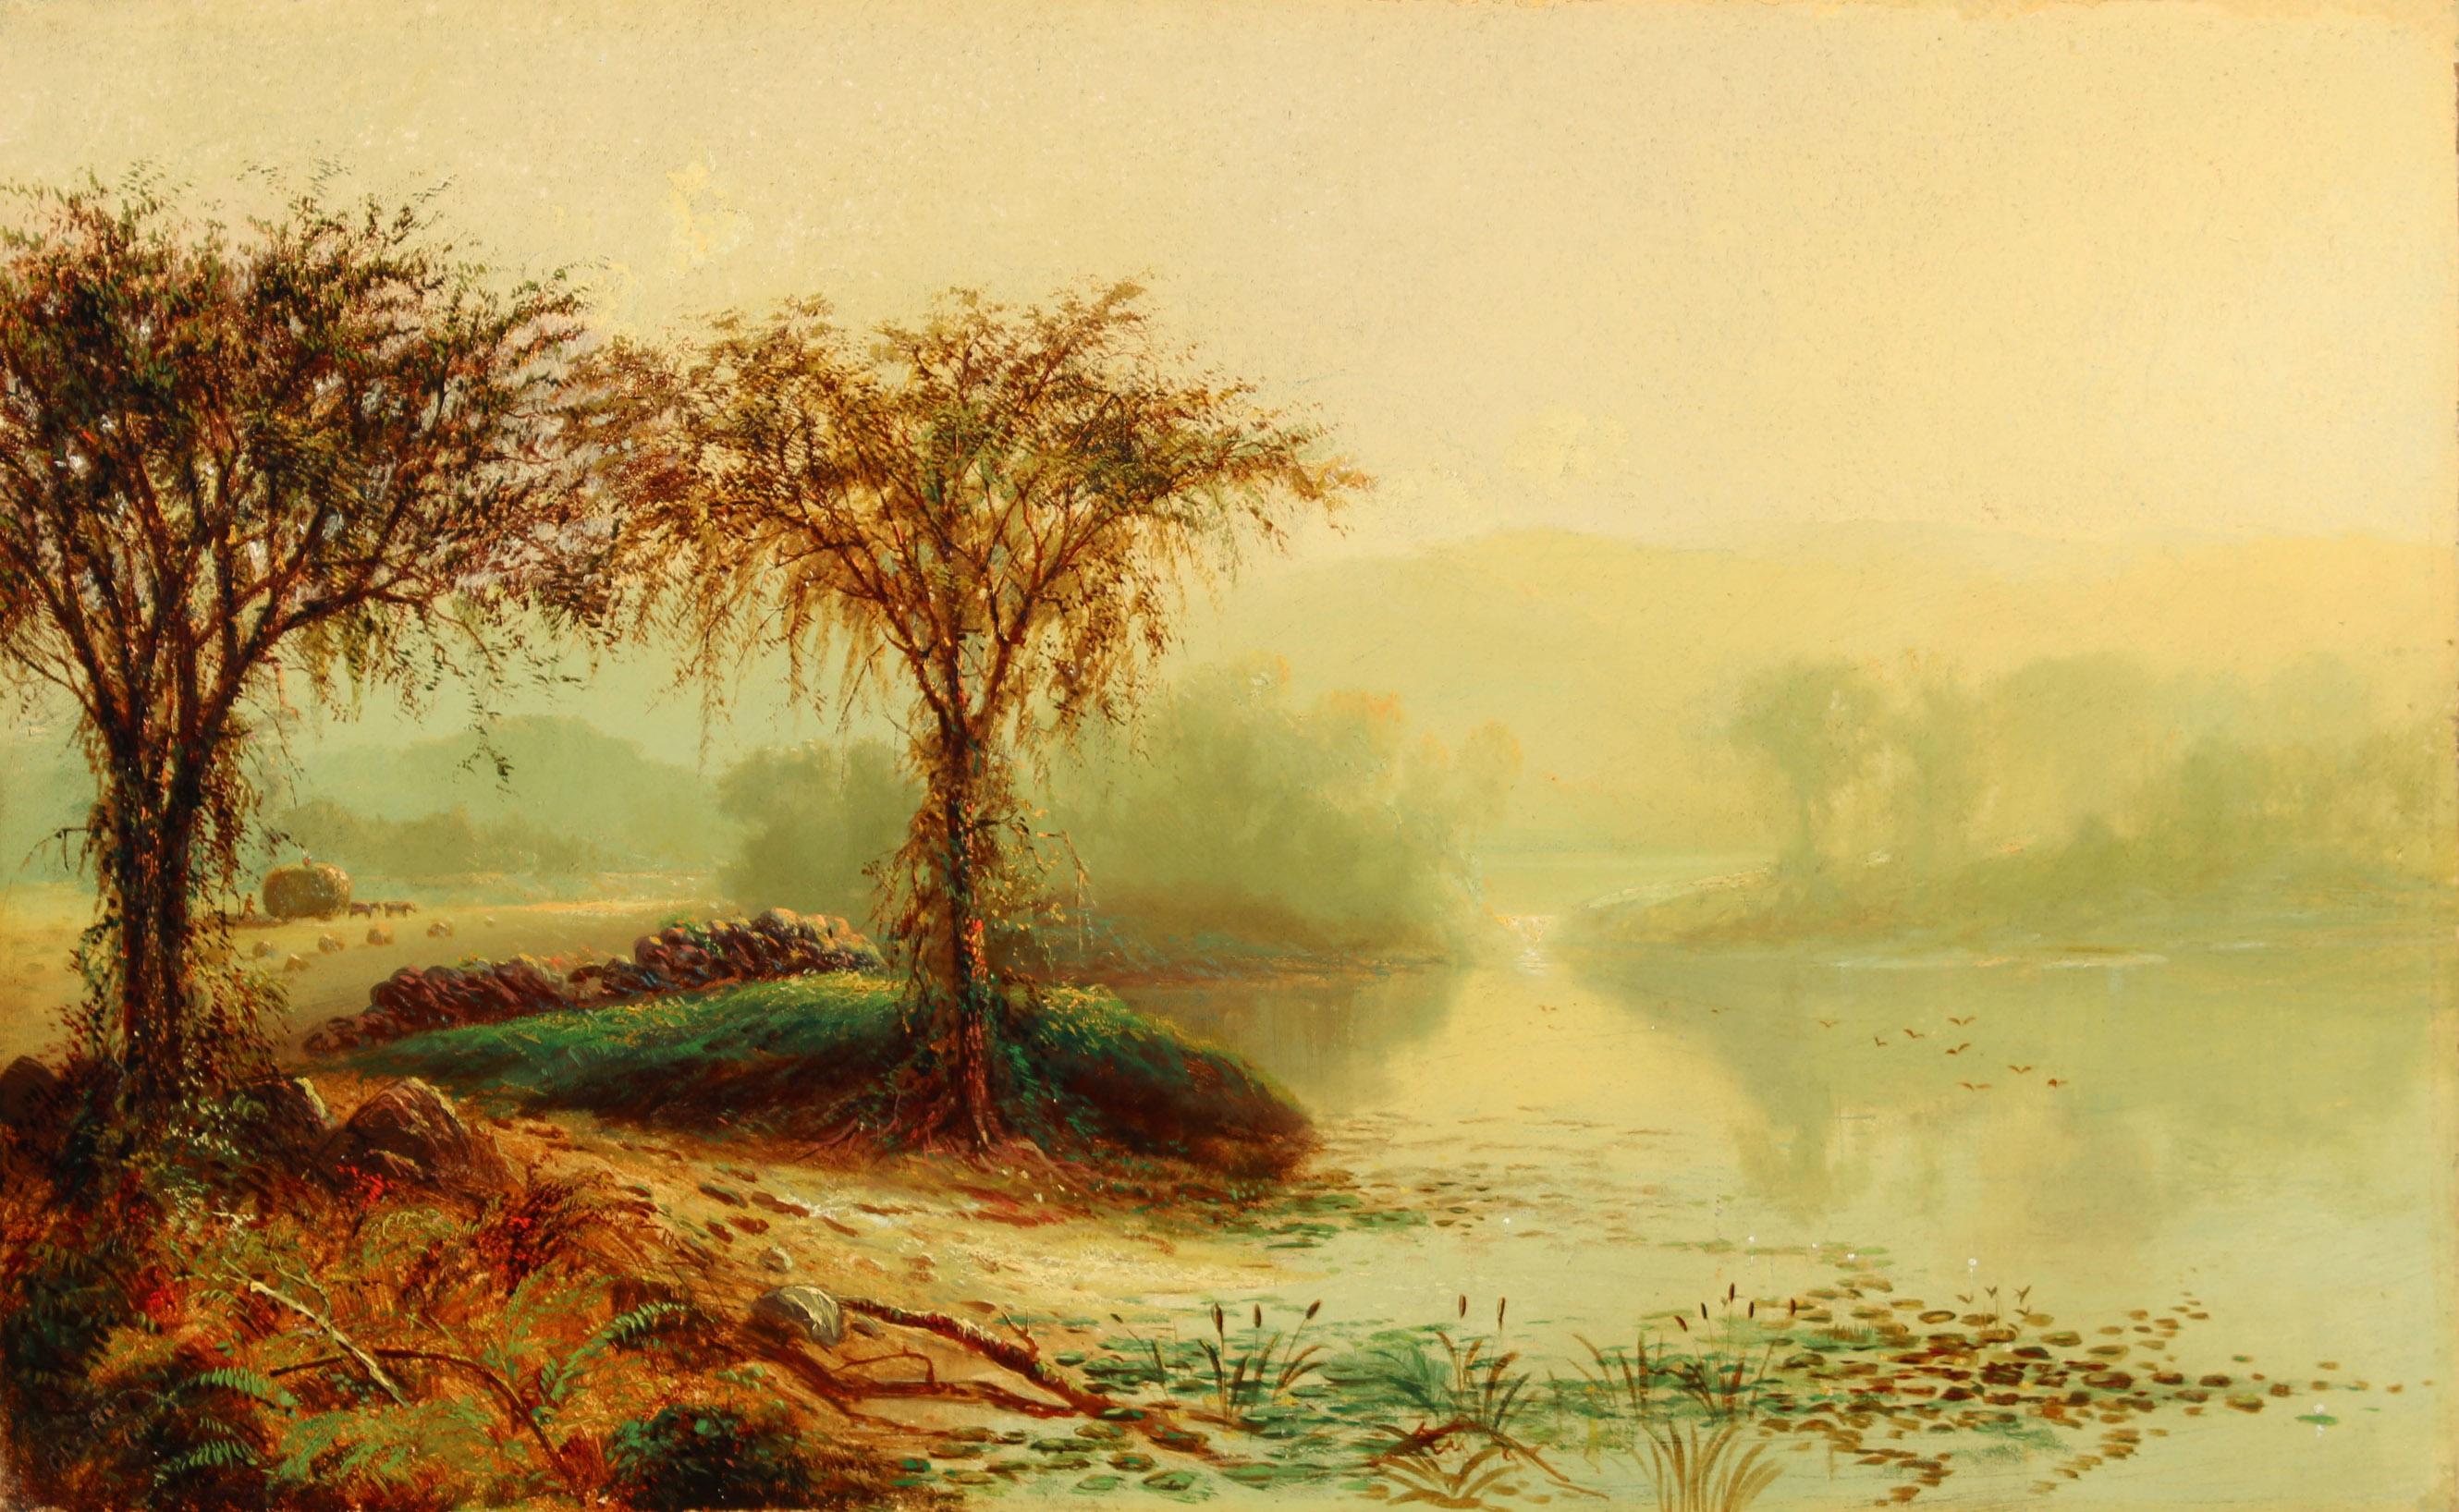 Hudson River School artist Charles H. Chapin's (1830-1889) painting entitled 